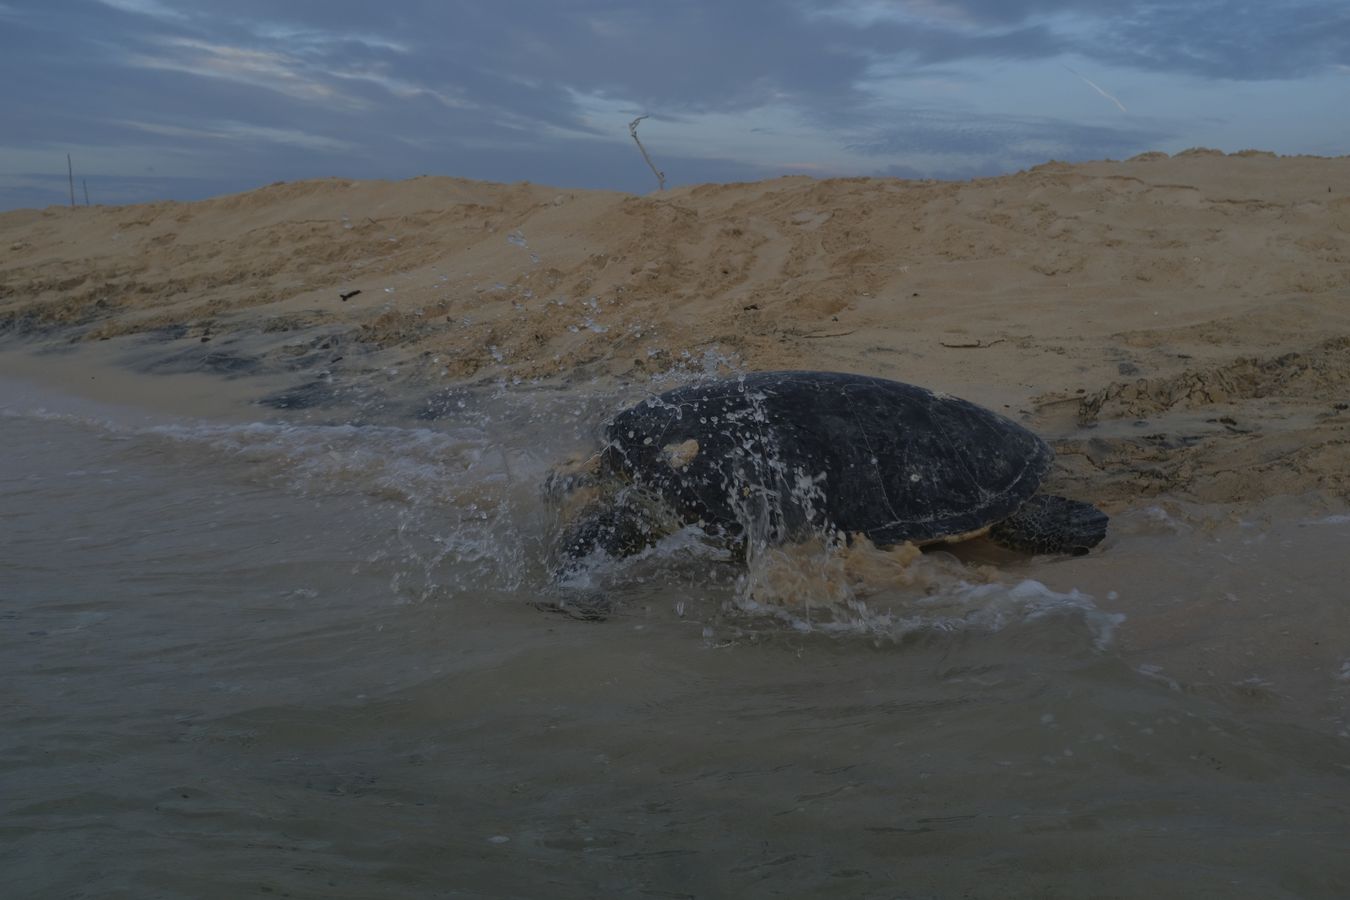 Early in the morning a green turtle enters the ocean after laying its eggs on the beach.